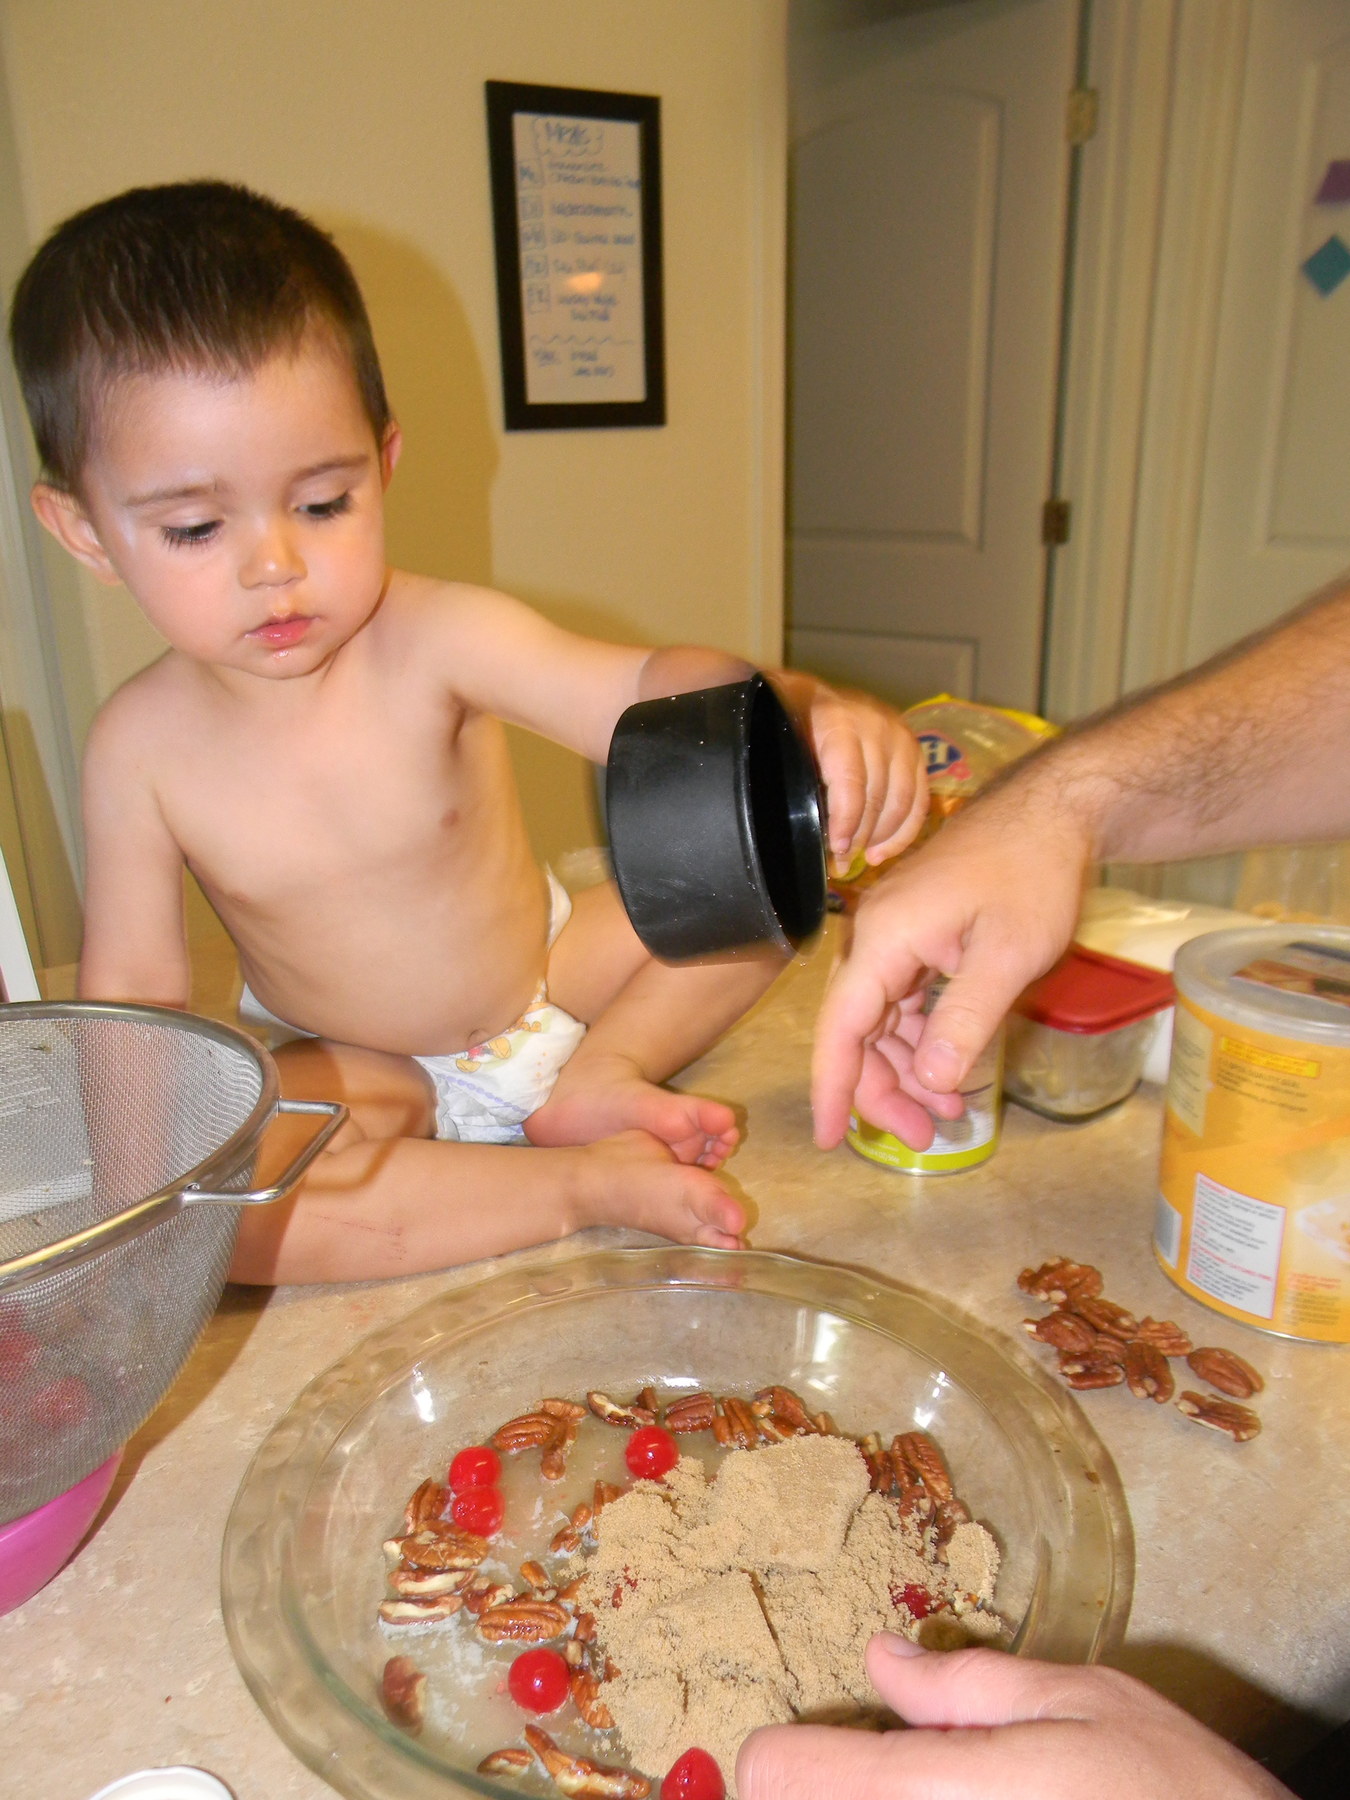 Judah helping John making pineapple upside-down cake (his biggest contributions were eating the cherries and trying to dump a whole bag of peanuts in the batter)